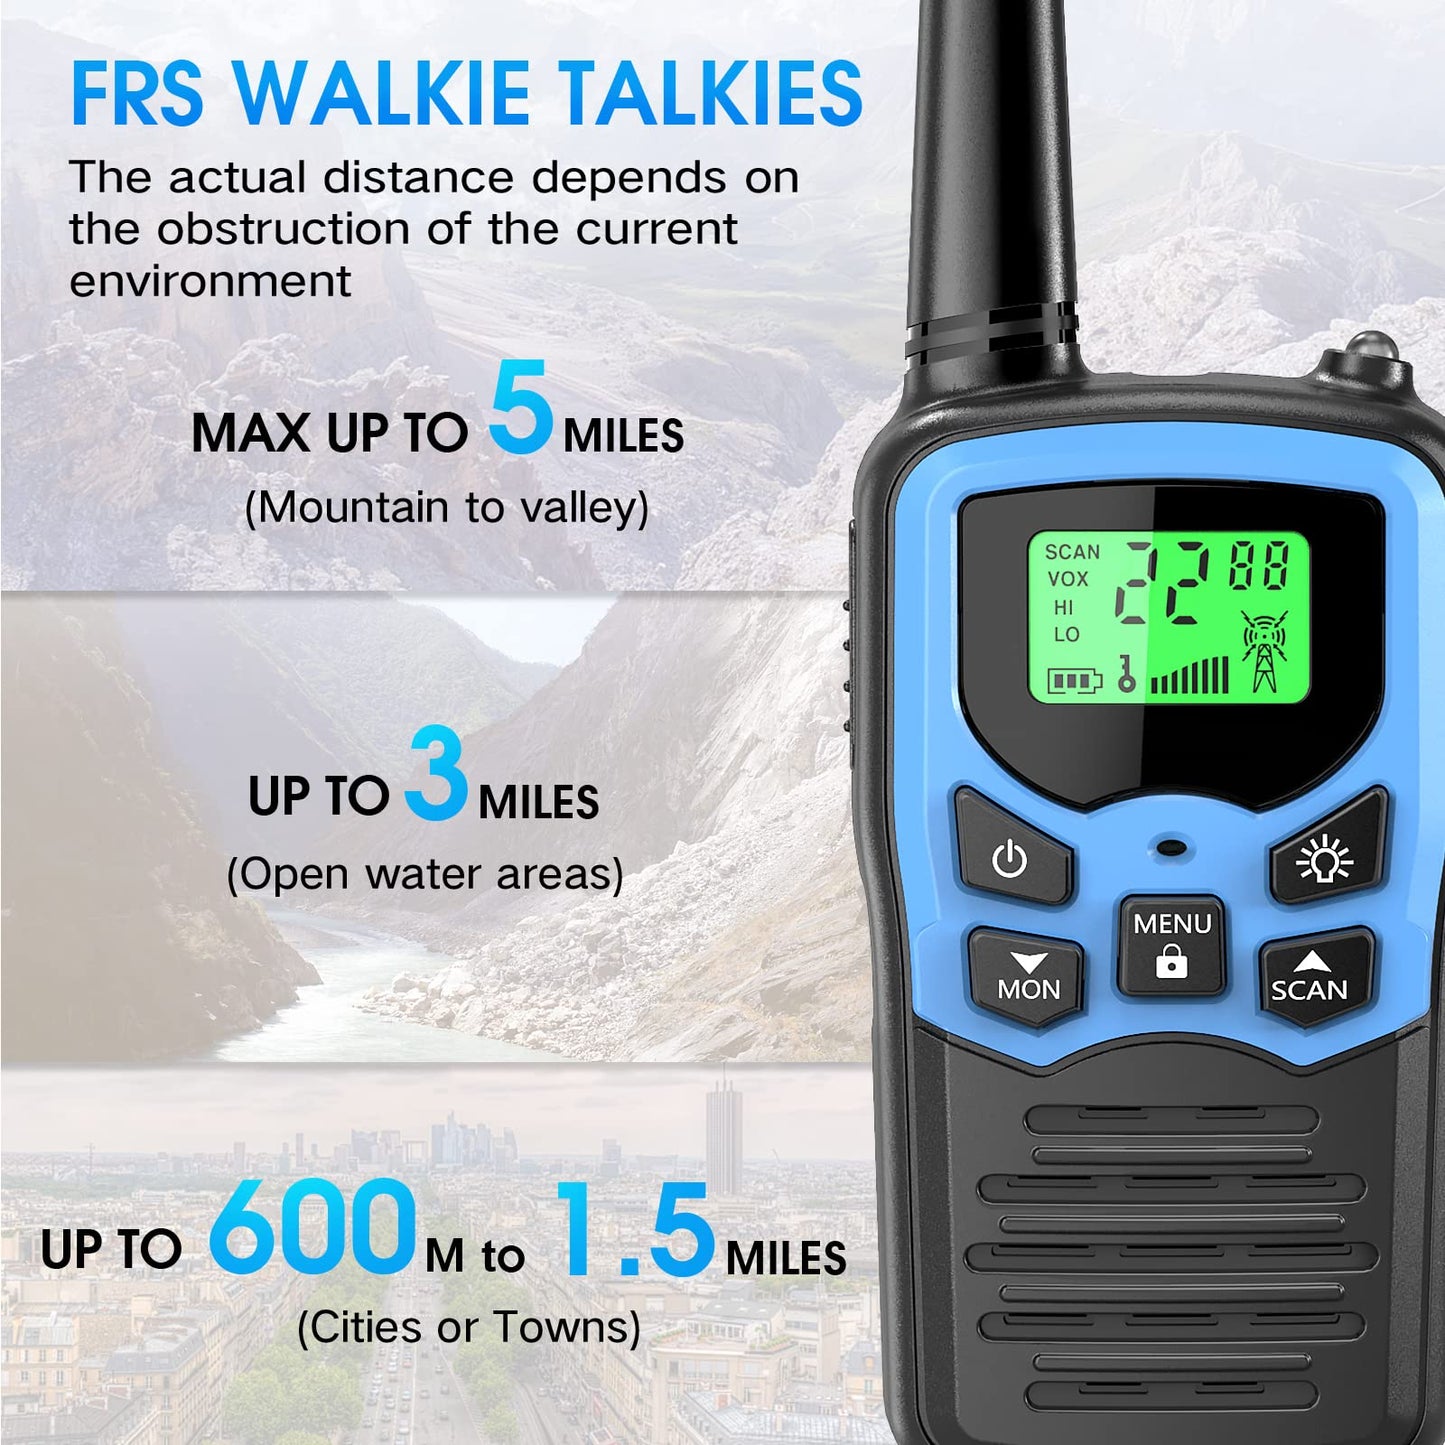 Walkie Talkies with 22 FRS Channels, MOICO Walkie Talkies for Adults with LED Flashlight VOX Scan LCD Display, Long Range Family Radios for Hiking Camping Trip (Blue, 4 Pack)